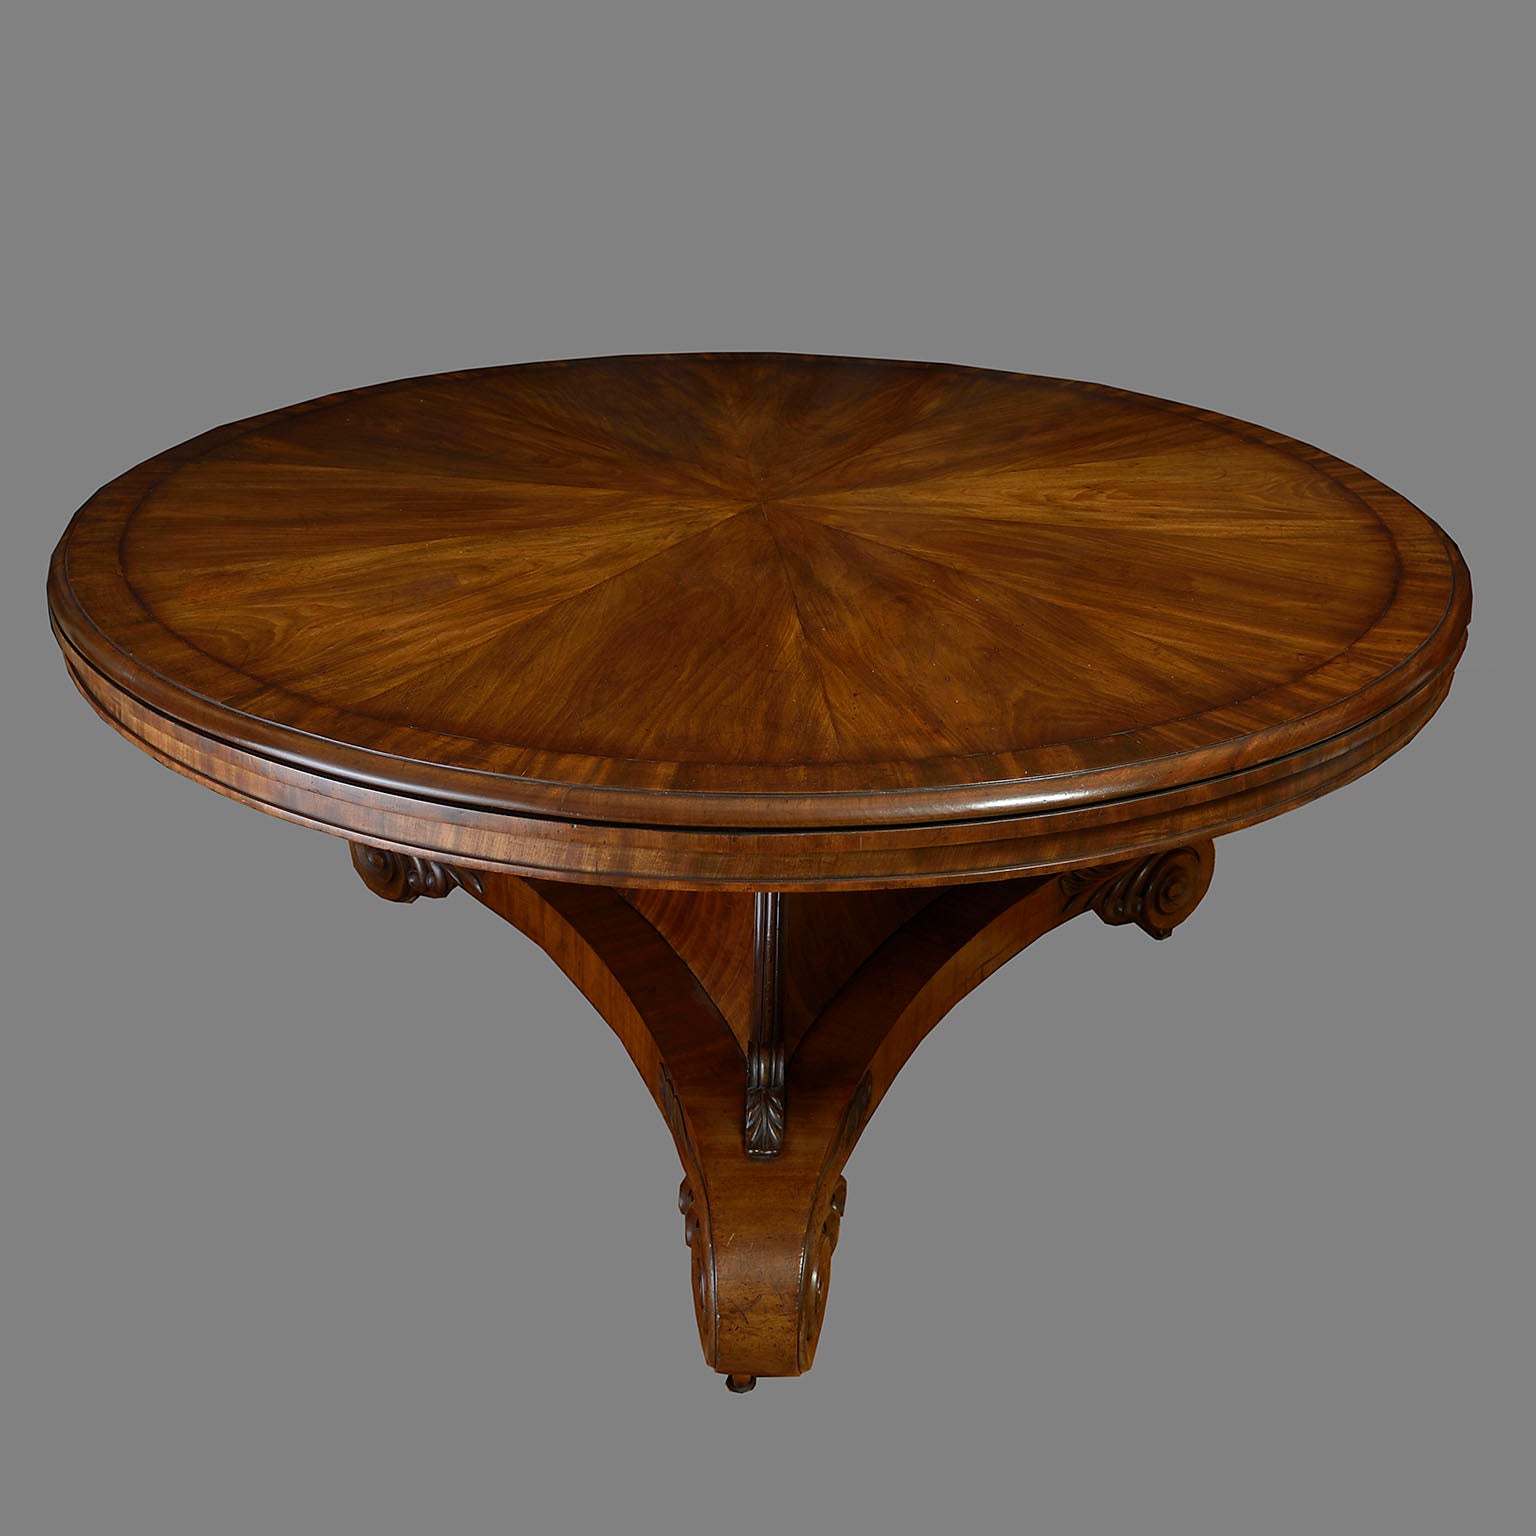 Circular Dining Table in the manner of Gillows of Lancaster